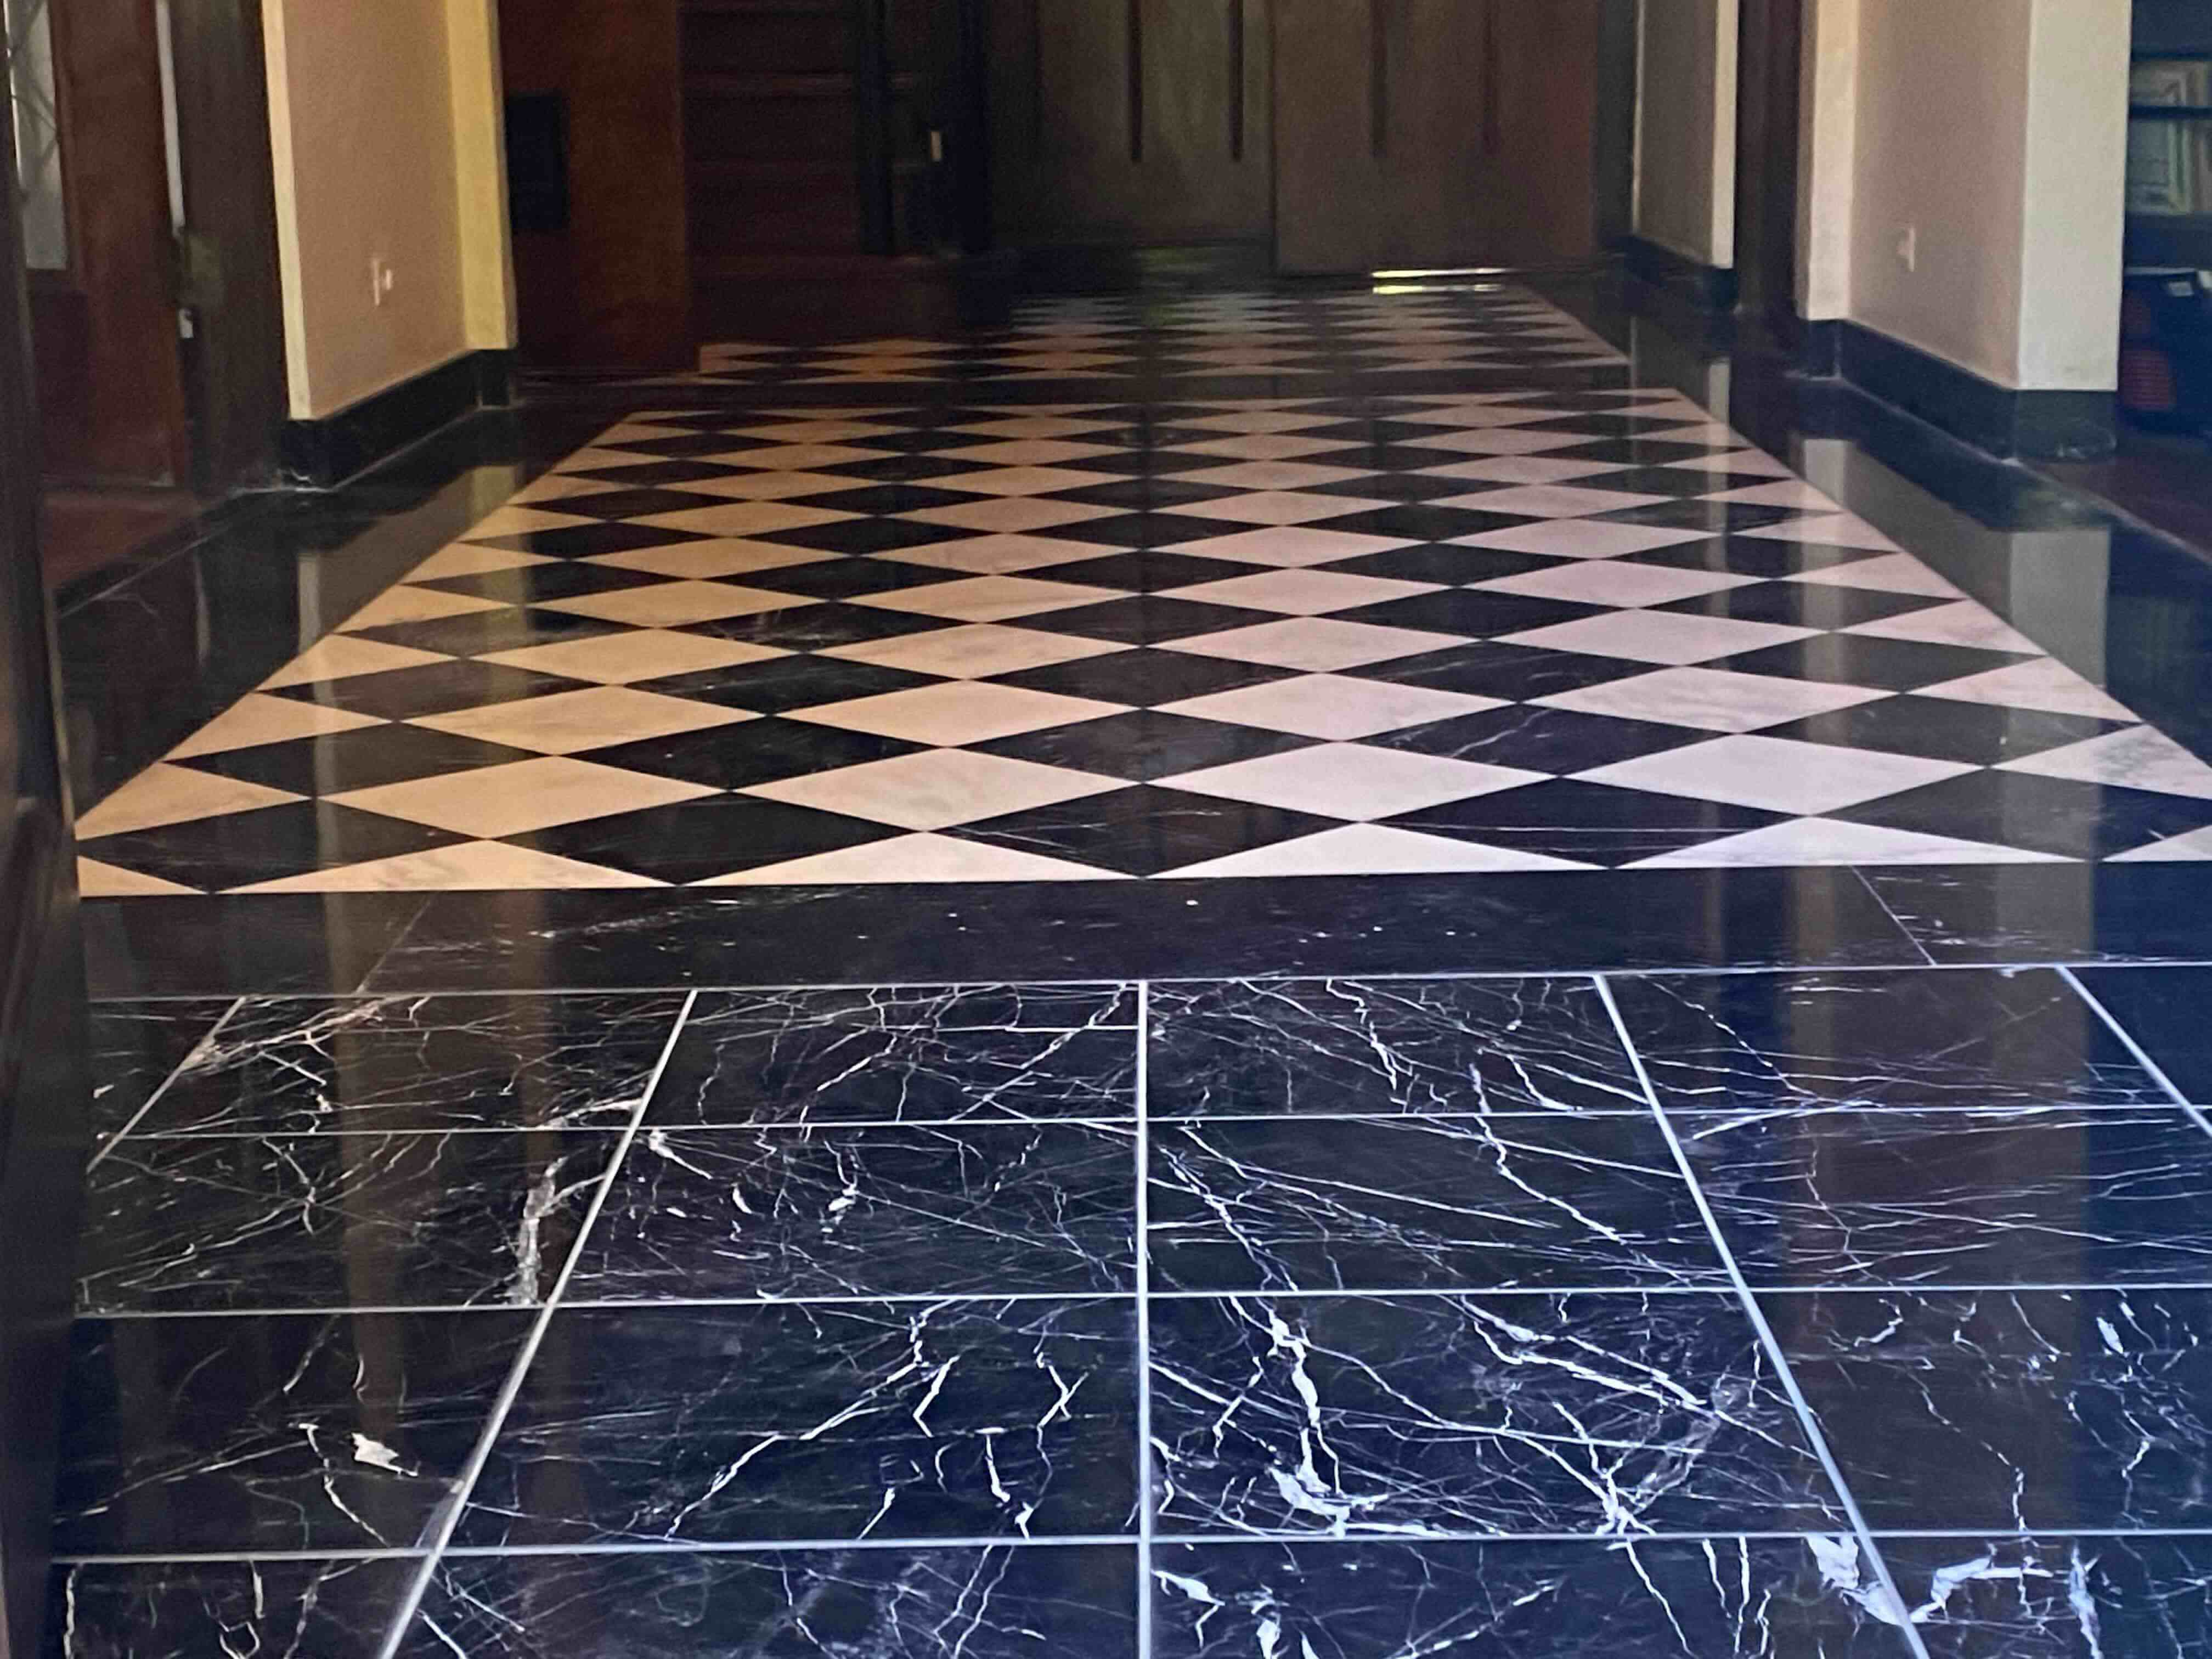 black and white marble flooring